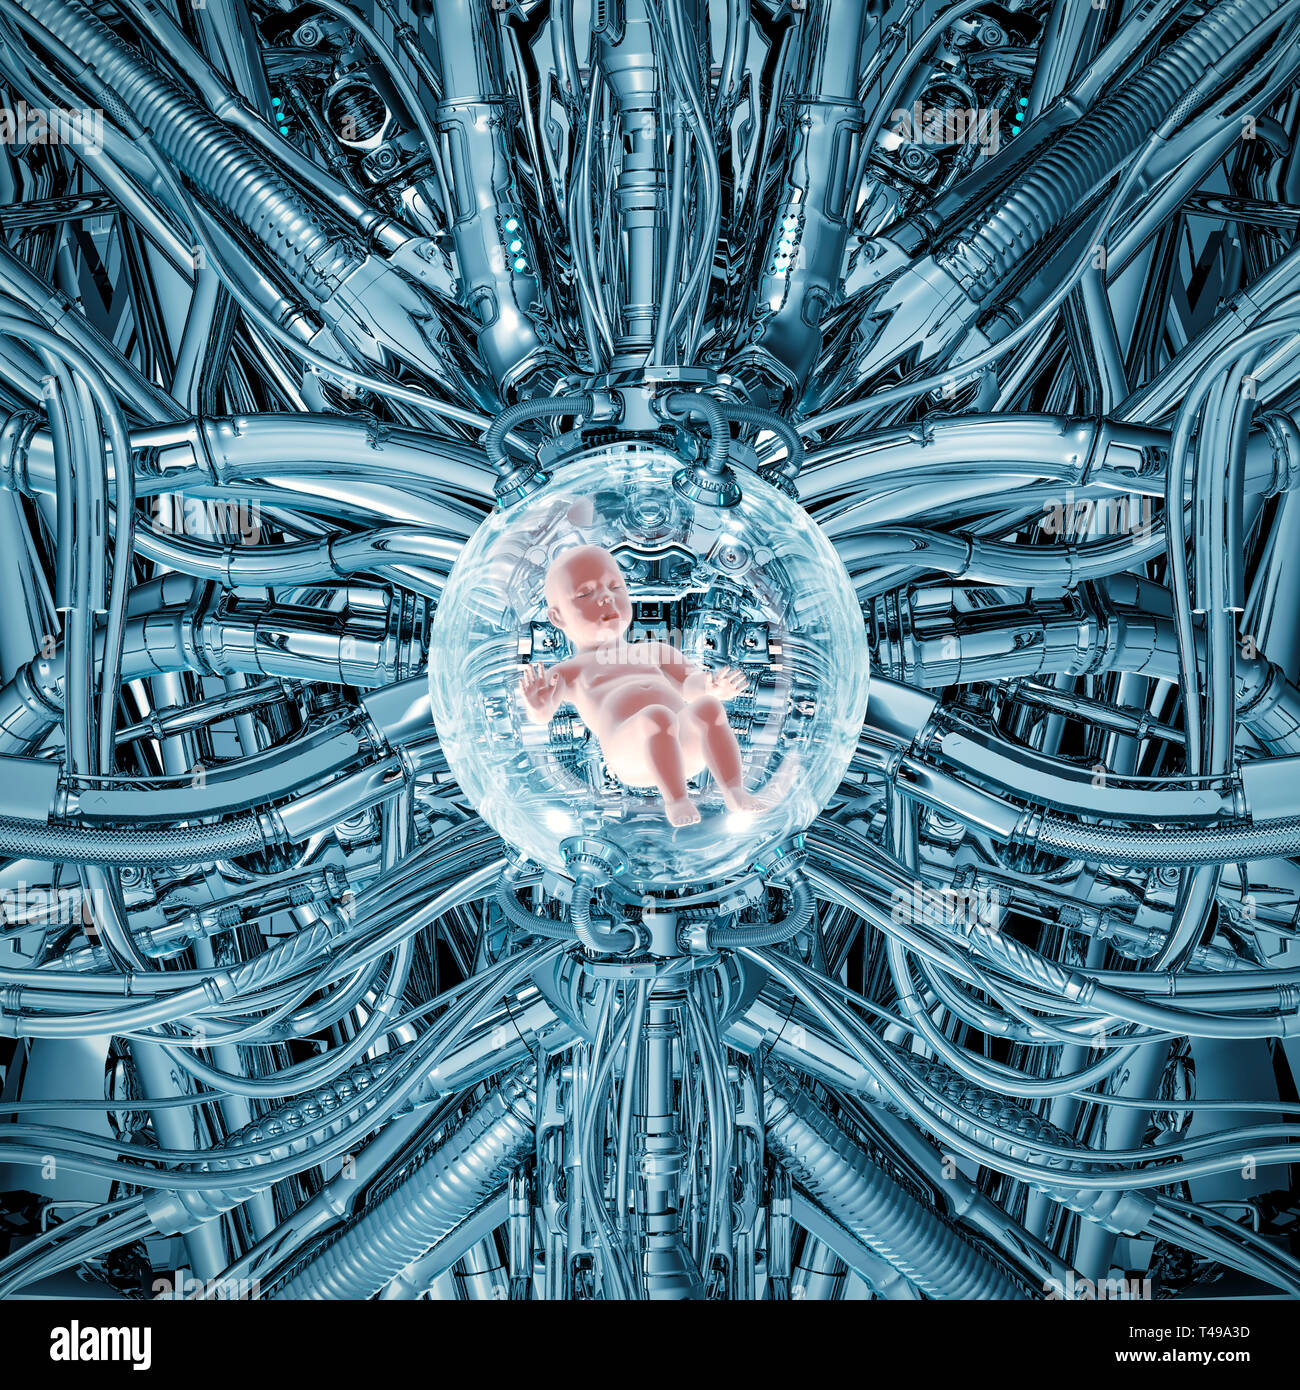 The baby pod chrome / 3D illustration of science fiction scene showing human child asleep inside bright complex futuristic incubator cloning machinery Stock Photo